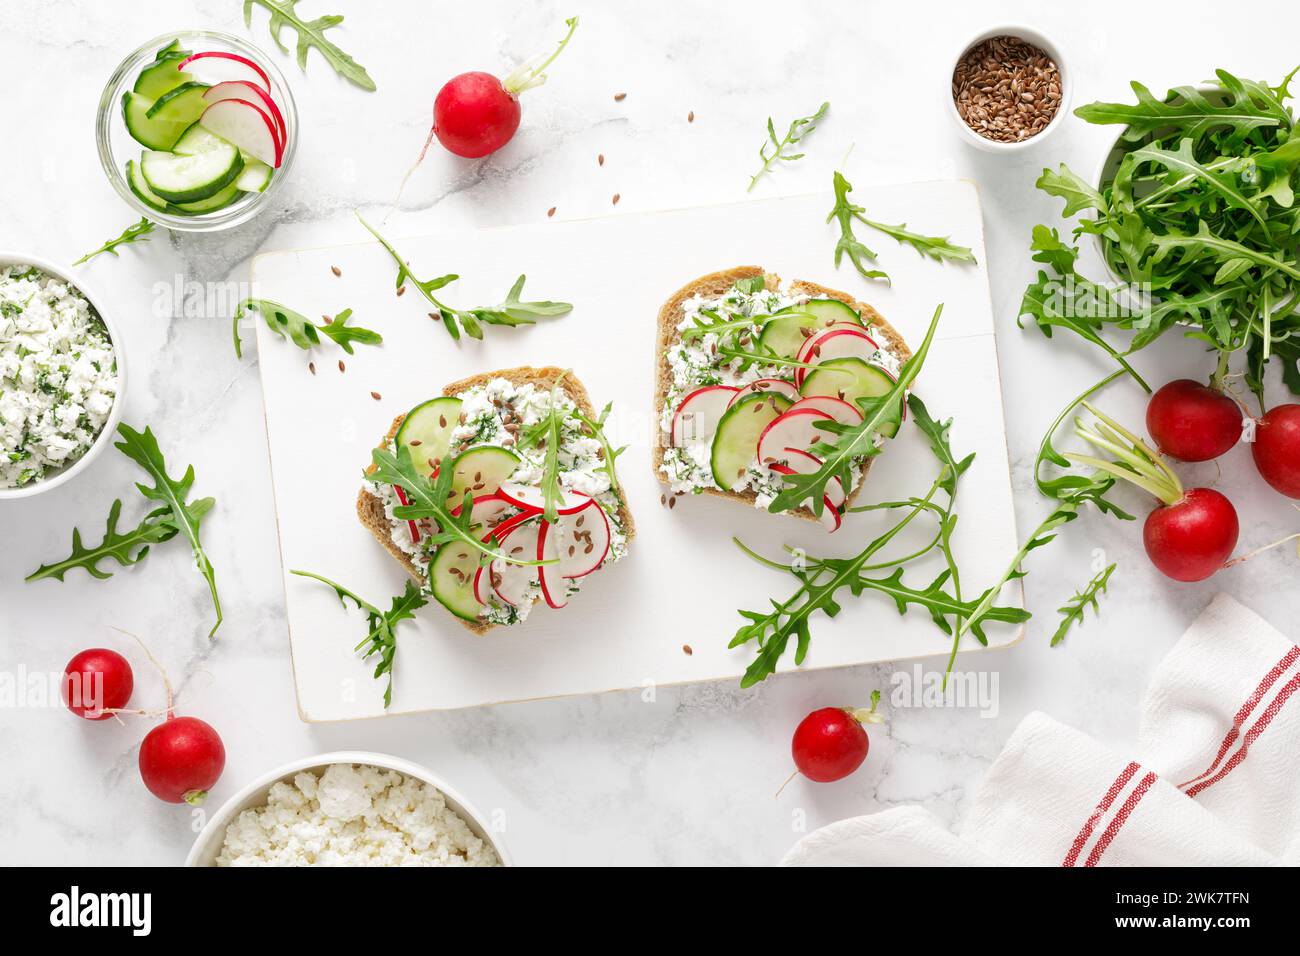 Sandwiches with rye bread toasts, cottage cheese, radish, cucumber, fresh greens and arugula for a healthy breakfast, top view Stock Photo